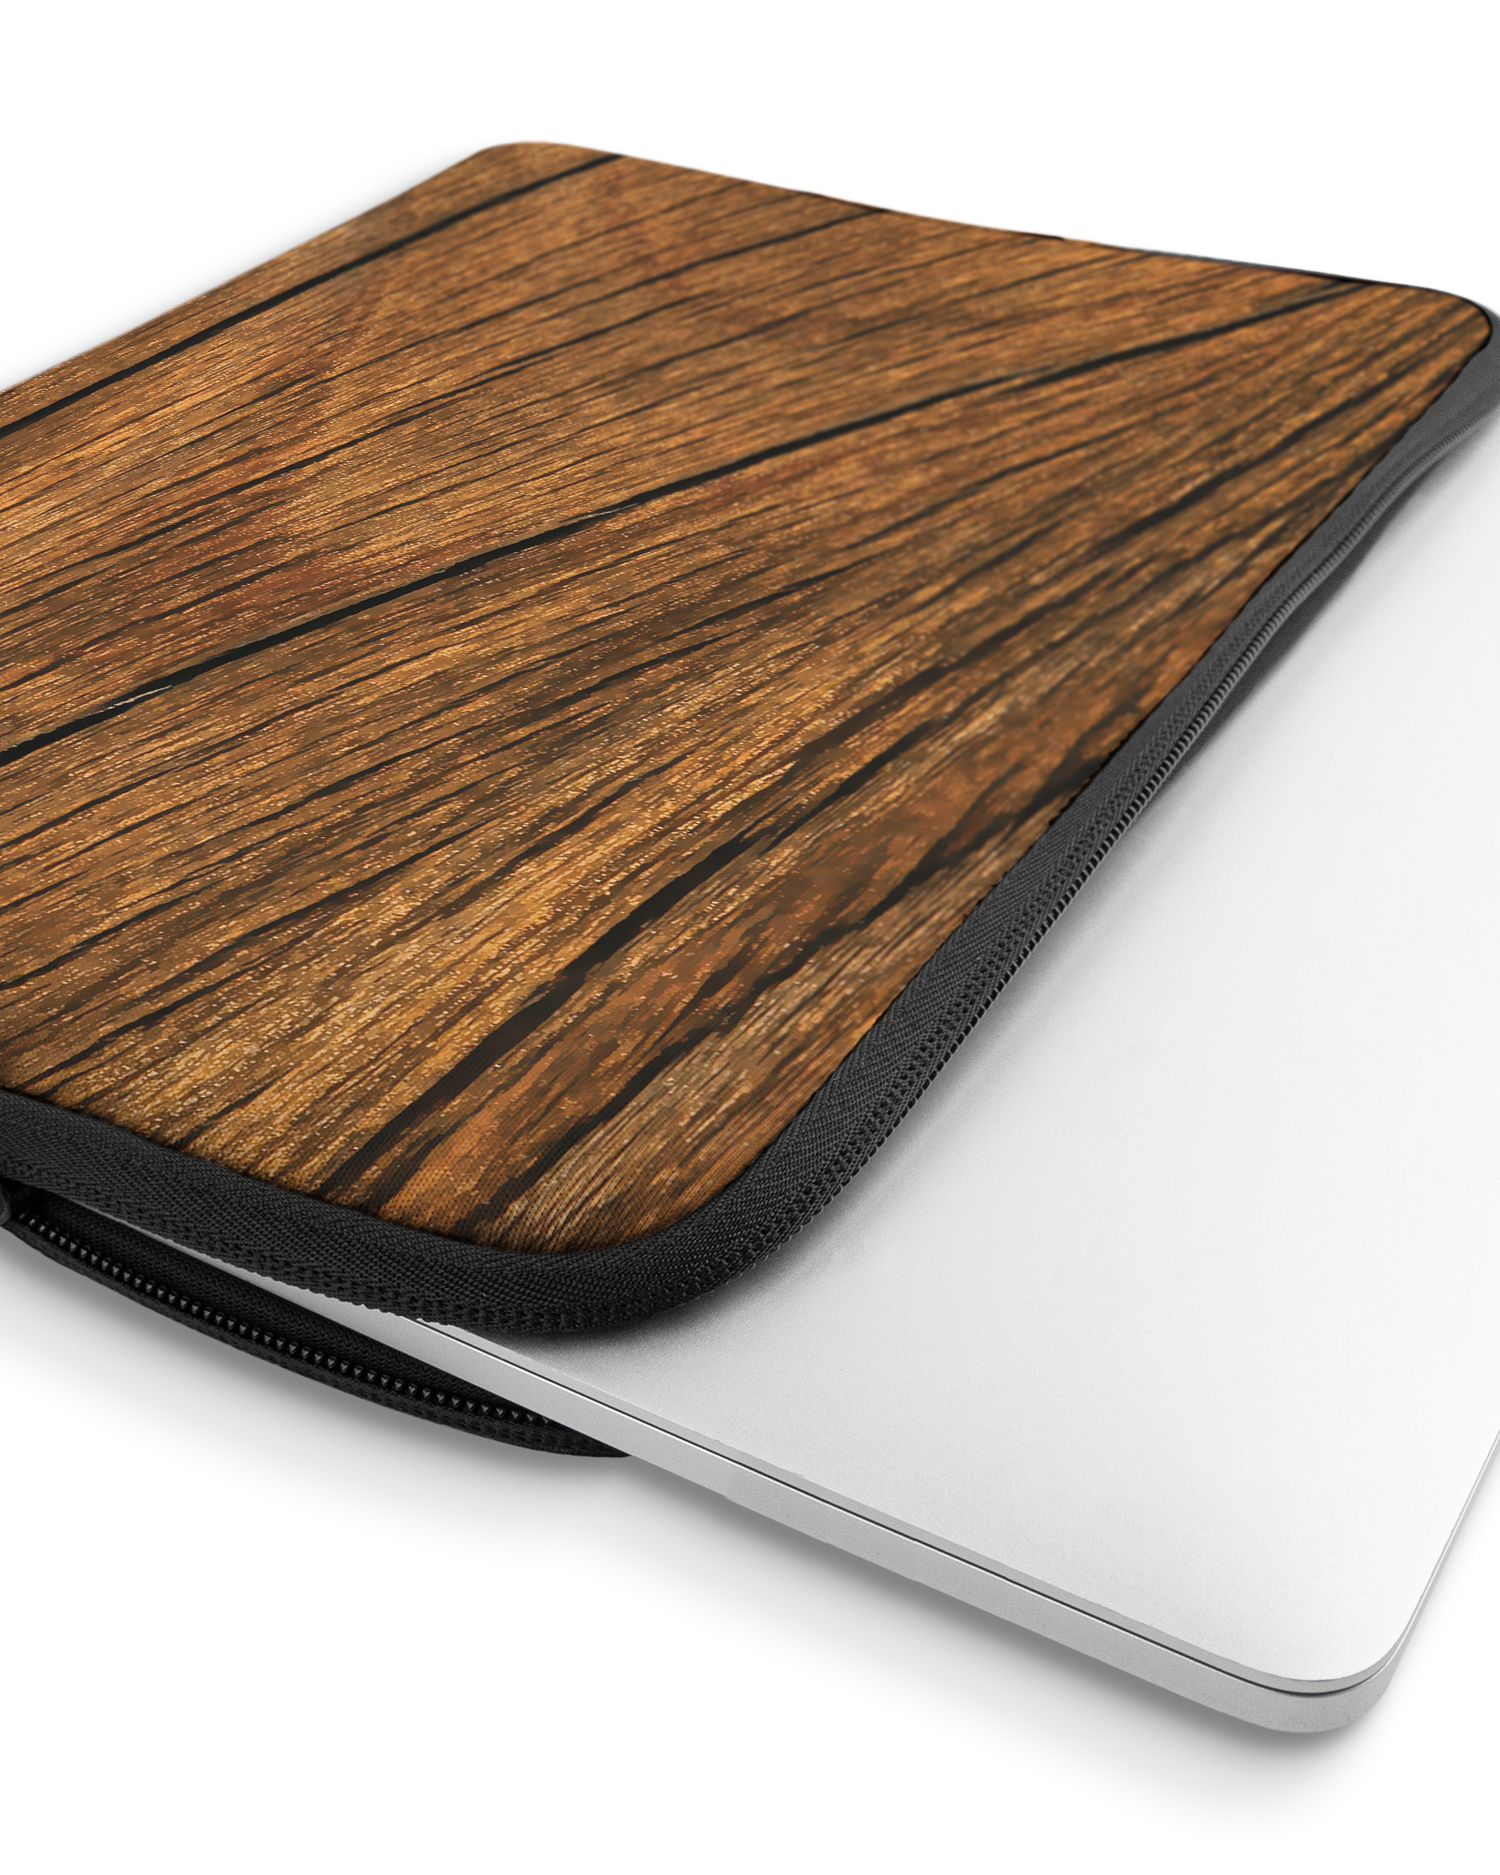 Wood Laptop Case 16 inch with device inside